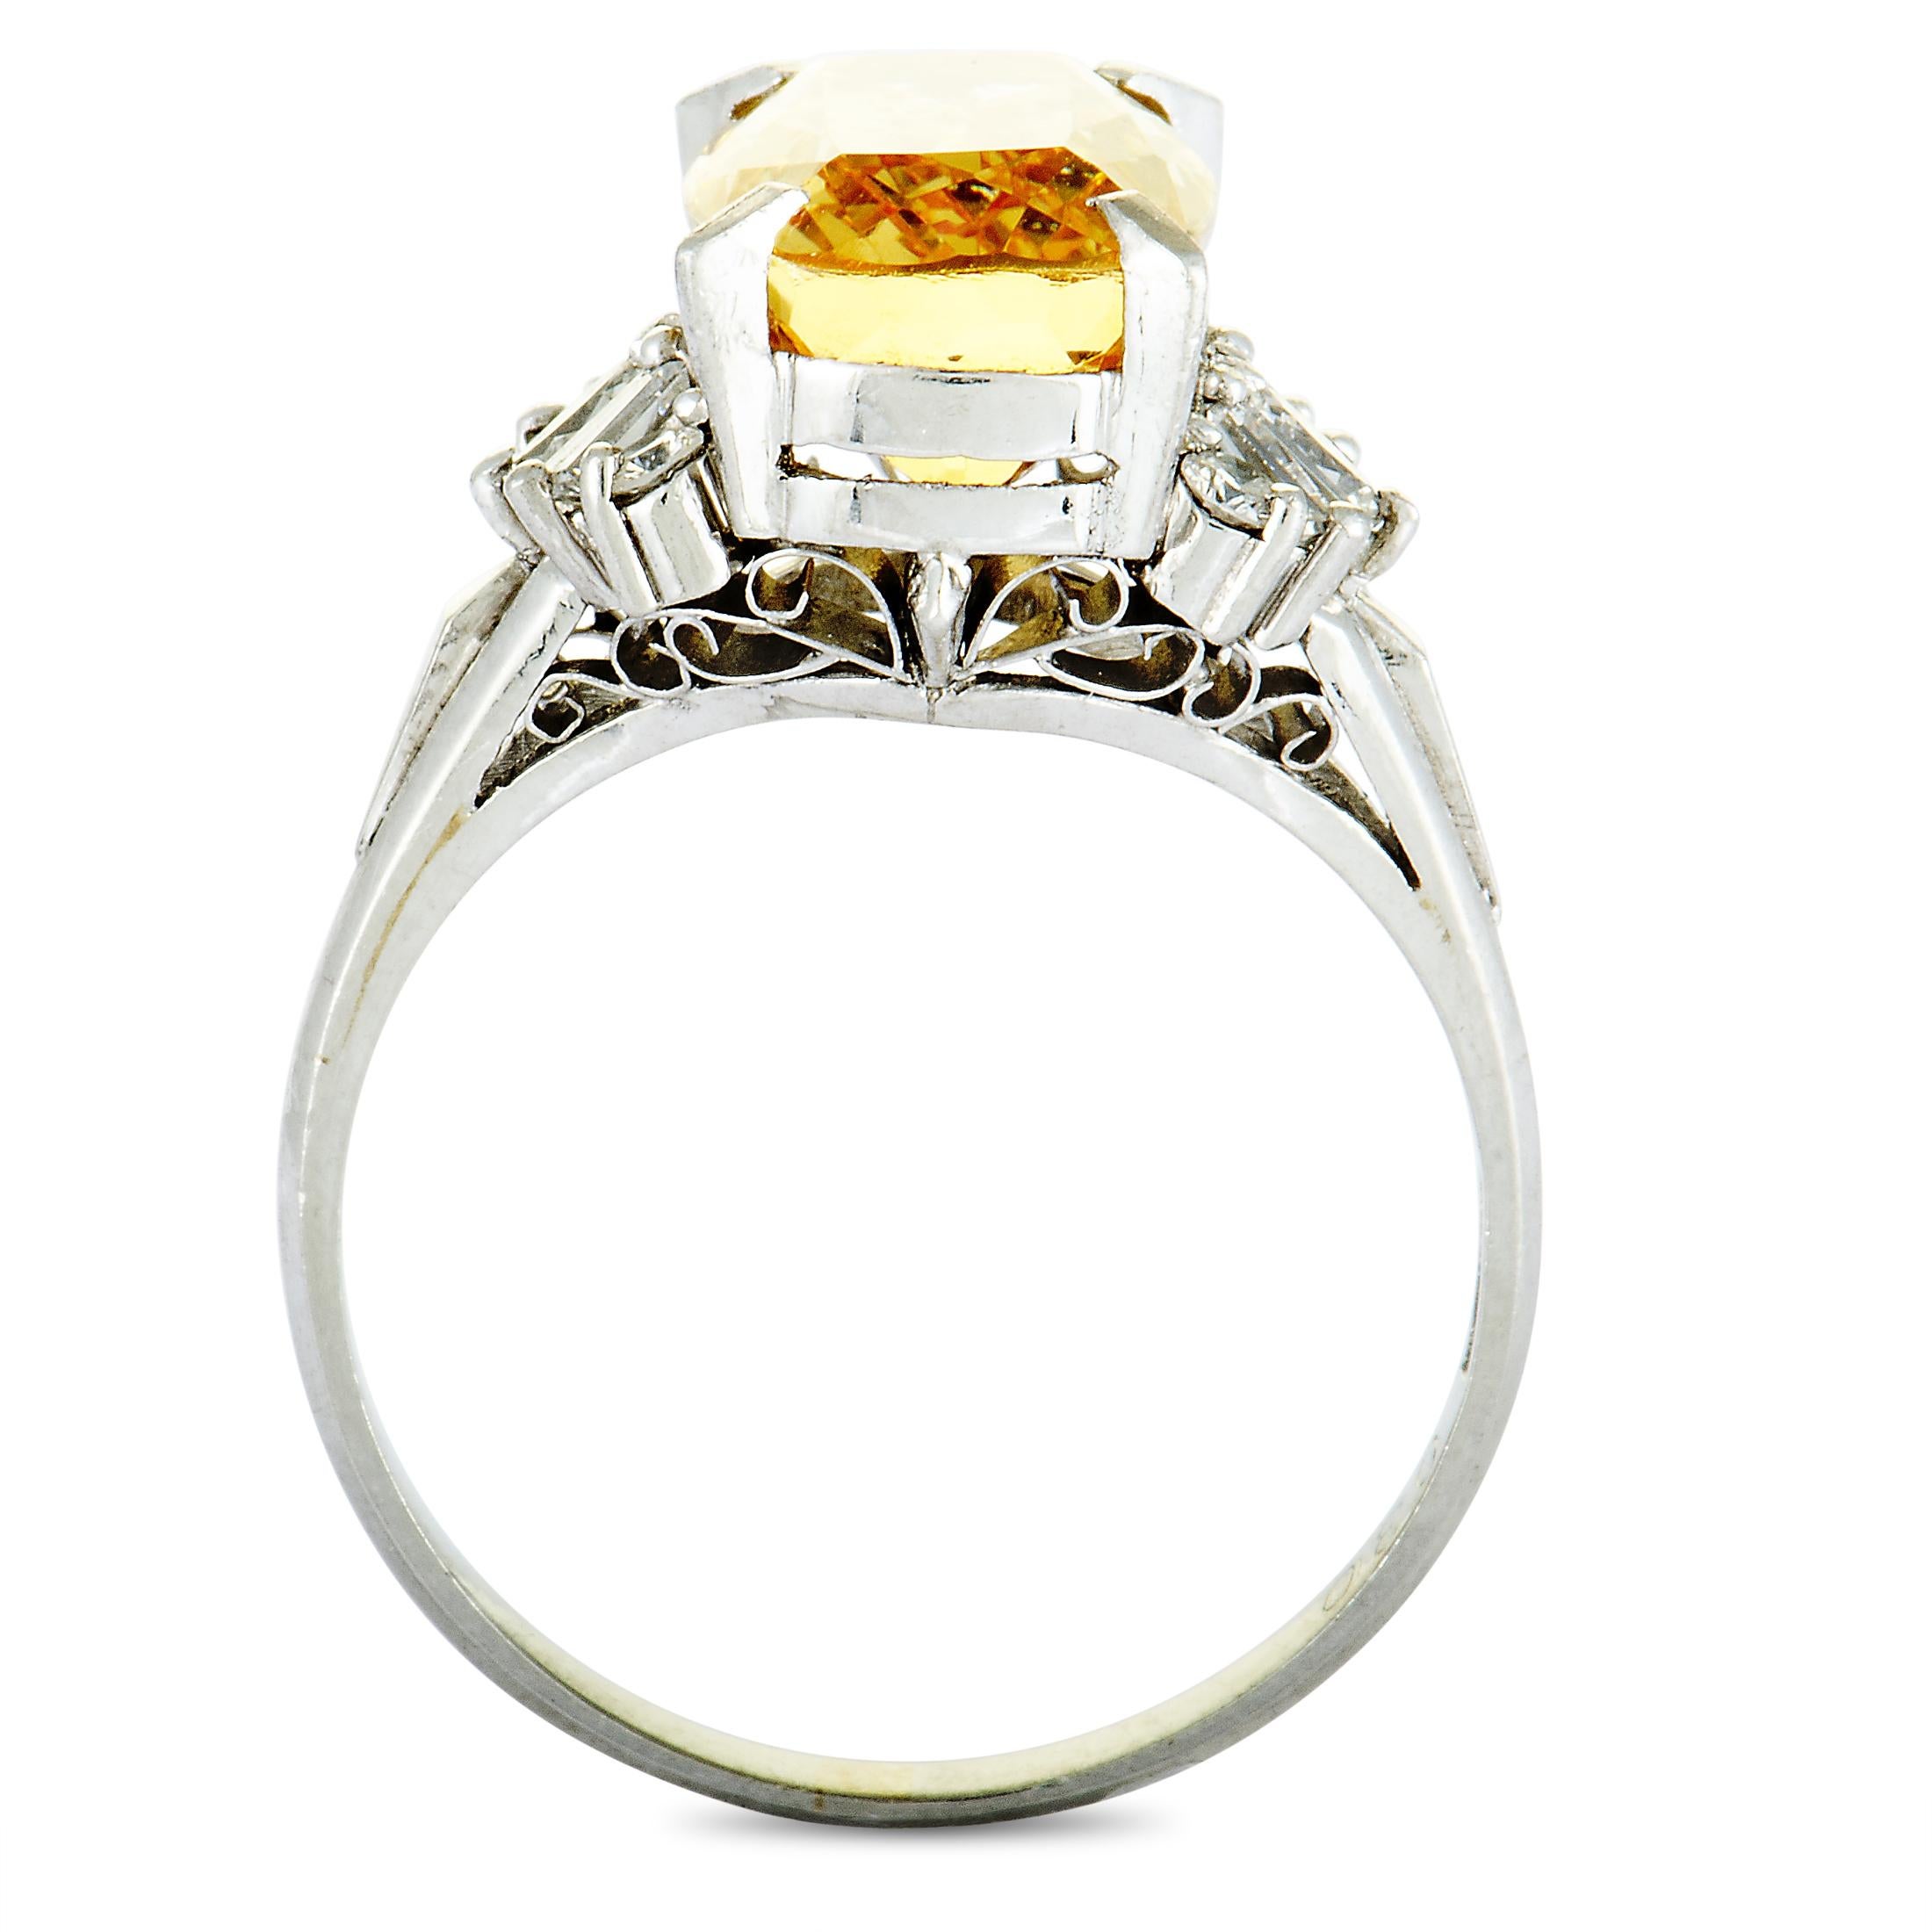 The stunning imperial topaz is the star of the show in this ravishing ring that is designed in a gorgeously refined fashion and expertly crafted from platinum. The imperial topaz weighs 5.18 carats and it is accentuated by resplendent diamonds that